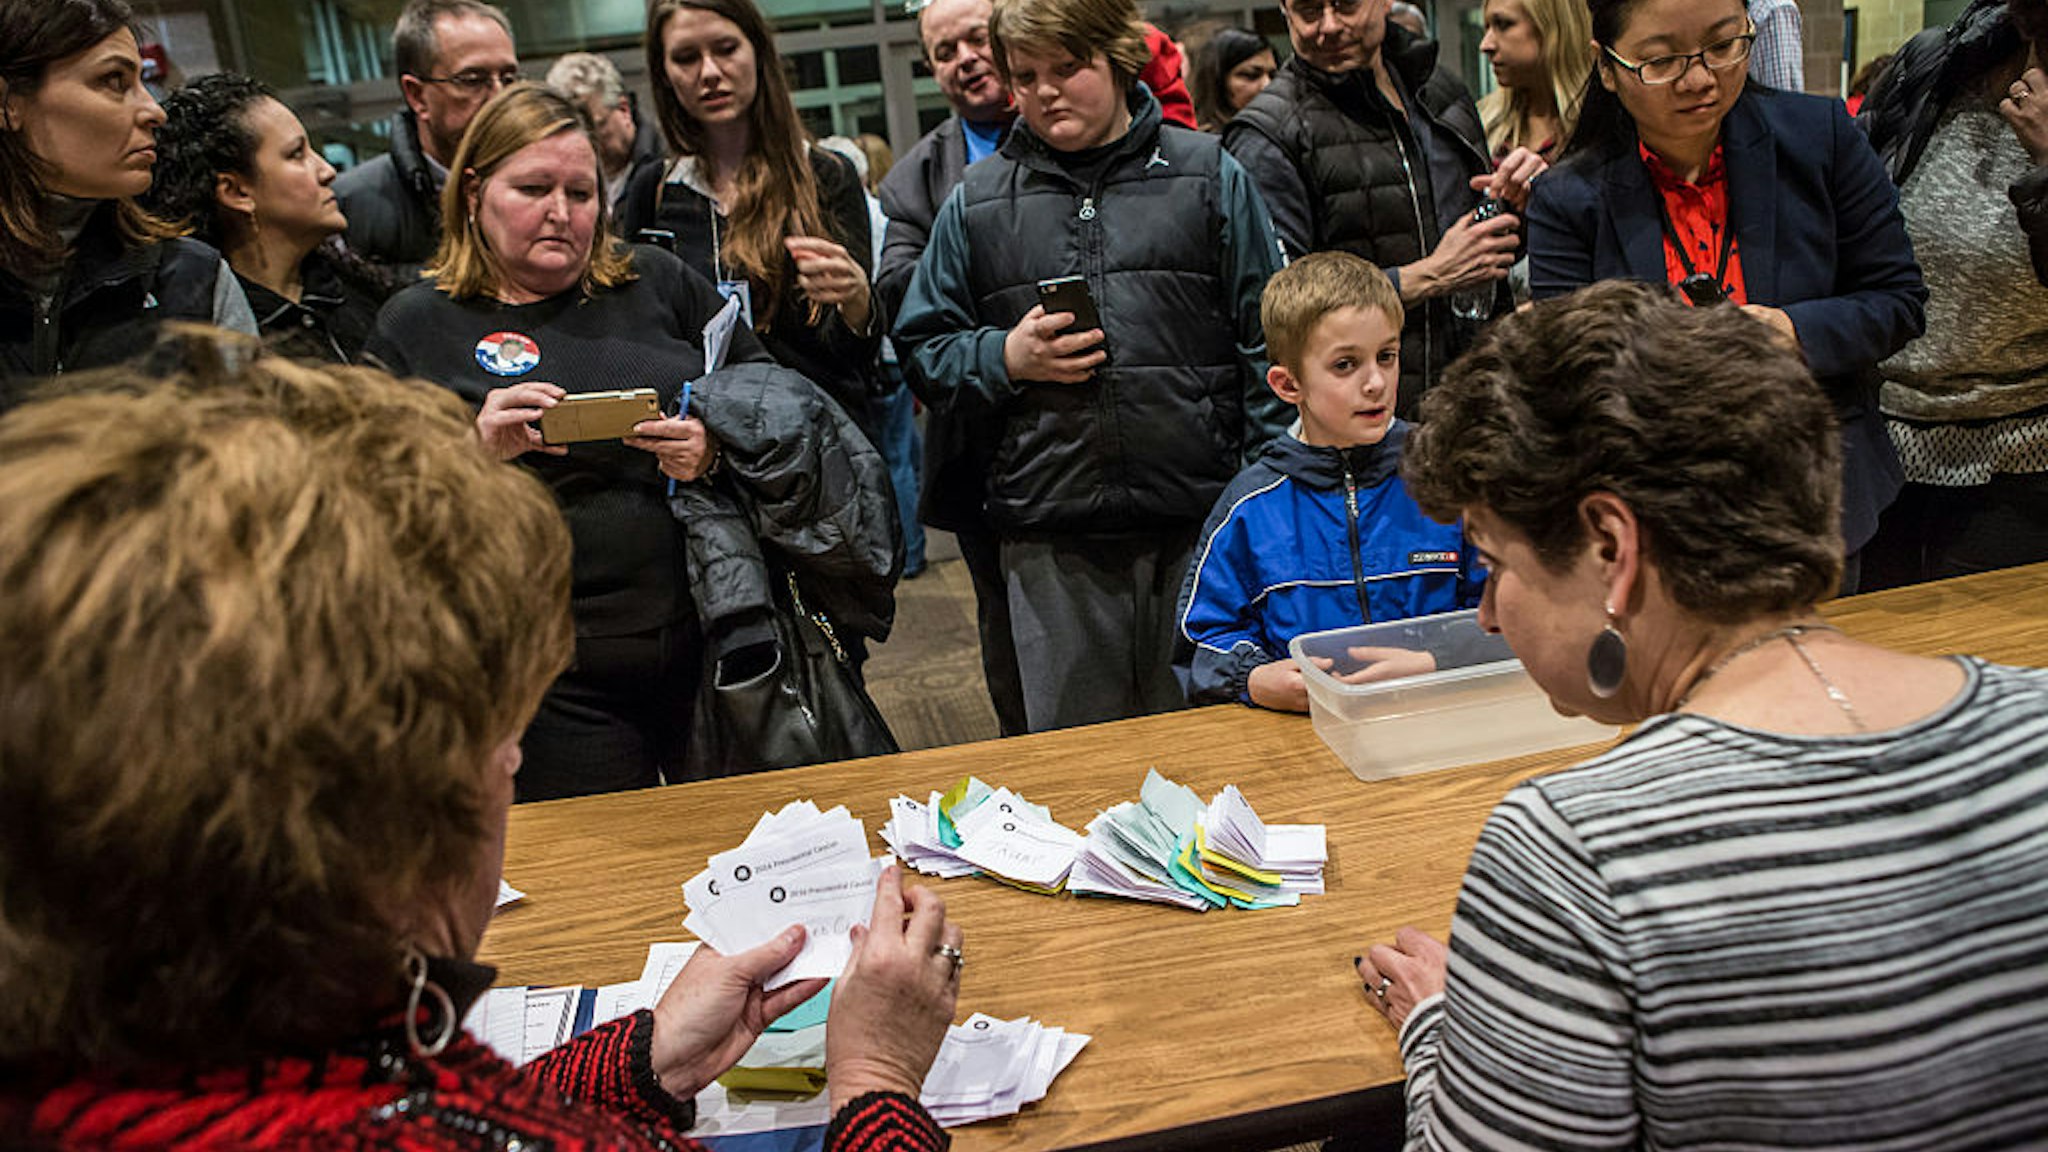 WEST DES MOINES, IA - FEBRUARY 1: Ballots are counted following the Republican party caucus in precinct 317 at Valley Church on February 1, 2016 in West Des Moines, Iowa. The Democratic and Republican Iowa Caucuses, the first step in nominating a presidential candidate from each party, take place today.